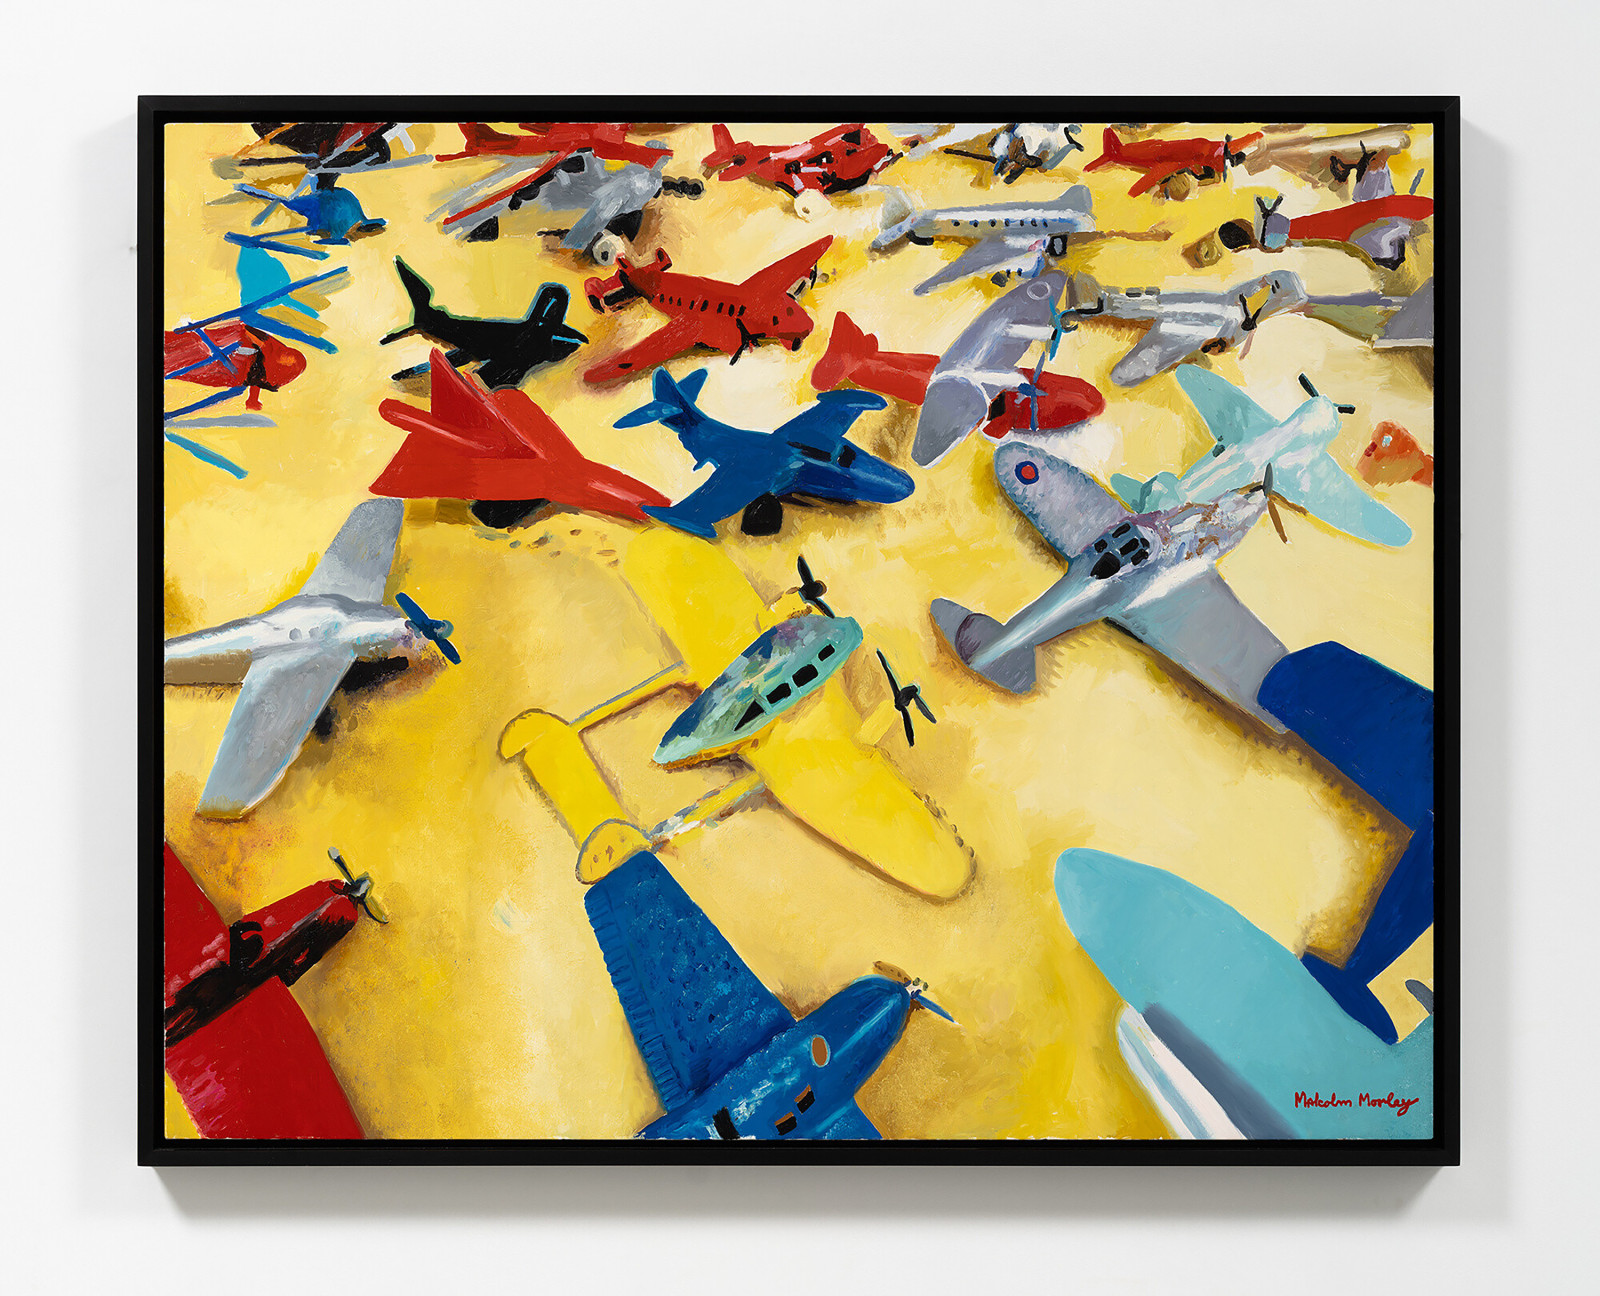 Malcolm Morley, Aircraft on a Yellow Plane, 2014